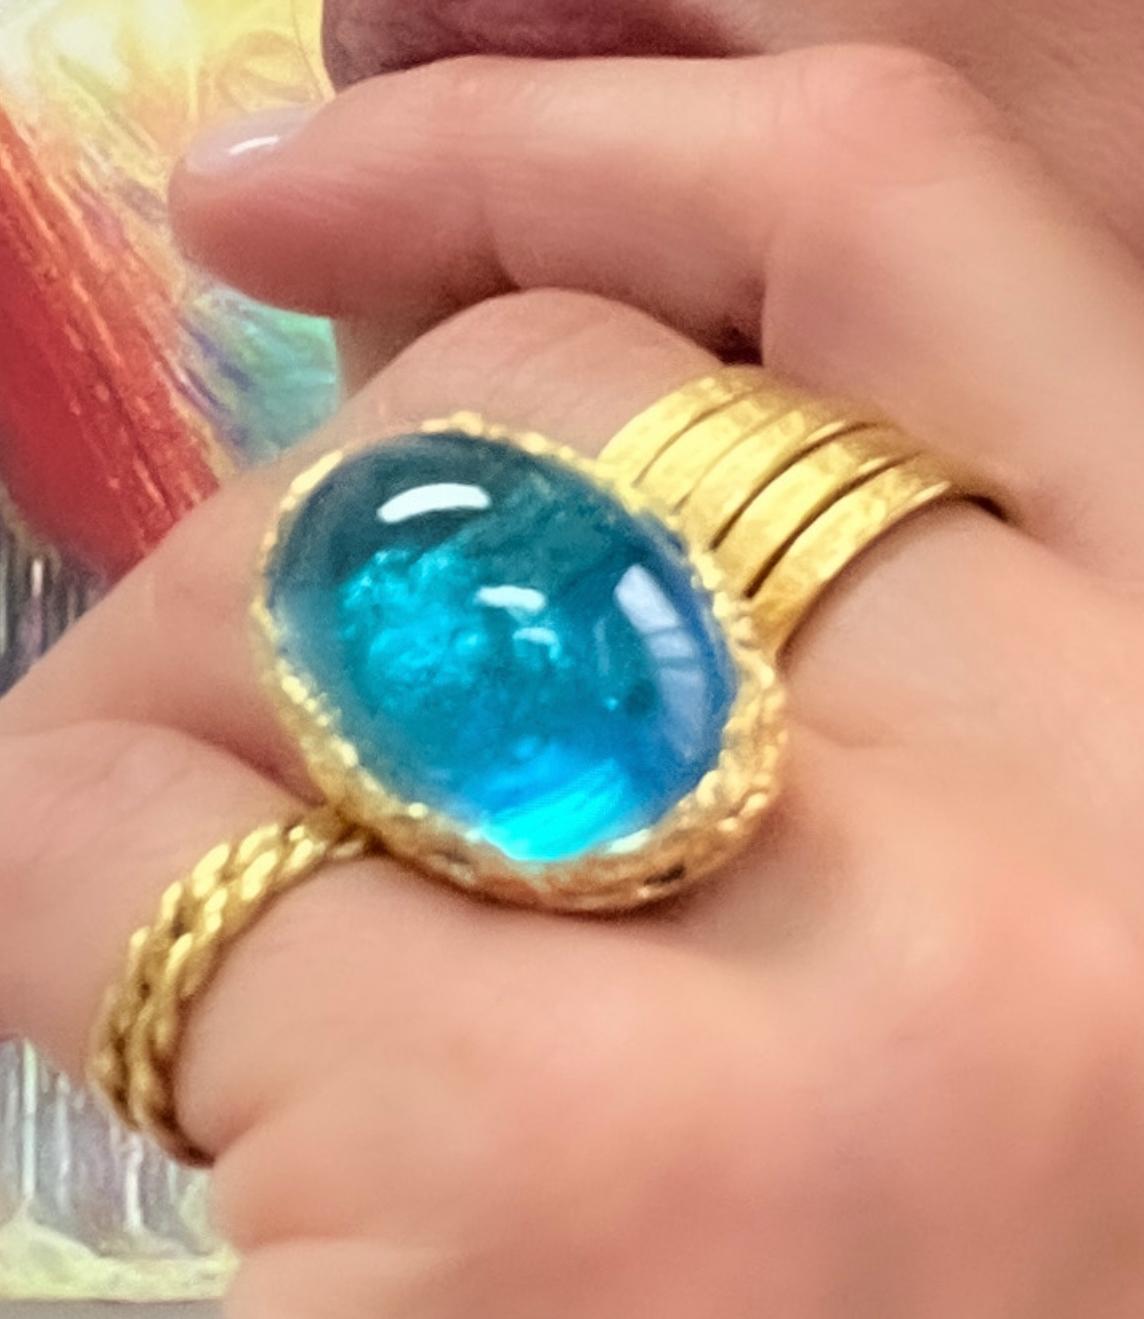 Dive deep into the deep blue color of this fabulous blue topaz cocktail ring set in 22k gold. This stunner is hand carved with cut outs to show the stone from every angle while maintaining a classic bezel setting. You will look and feel like a queen